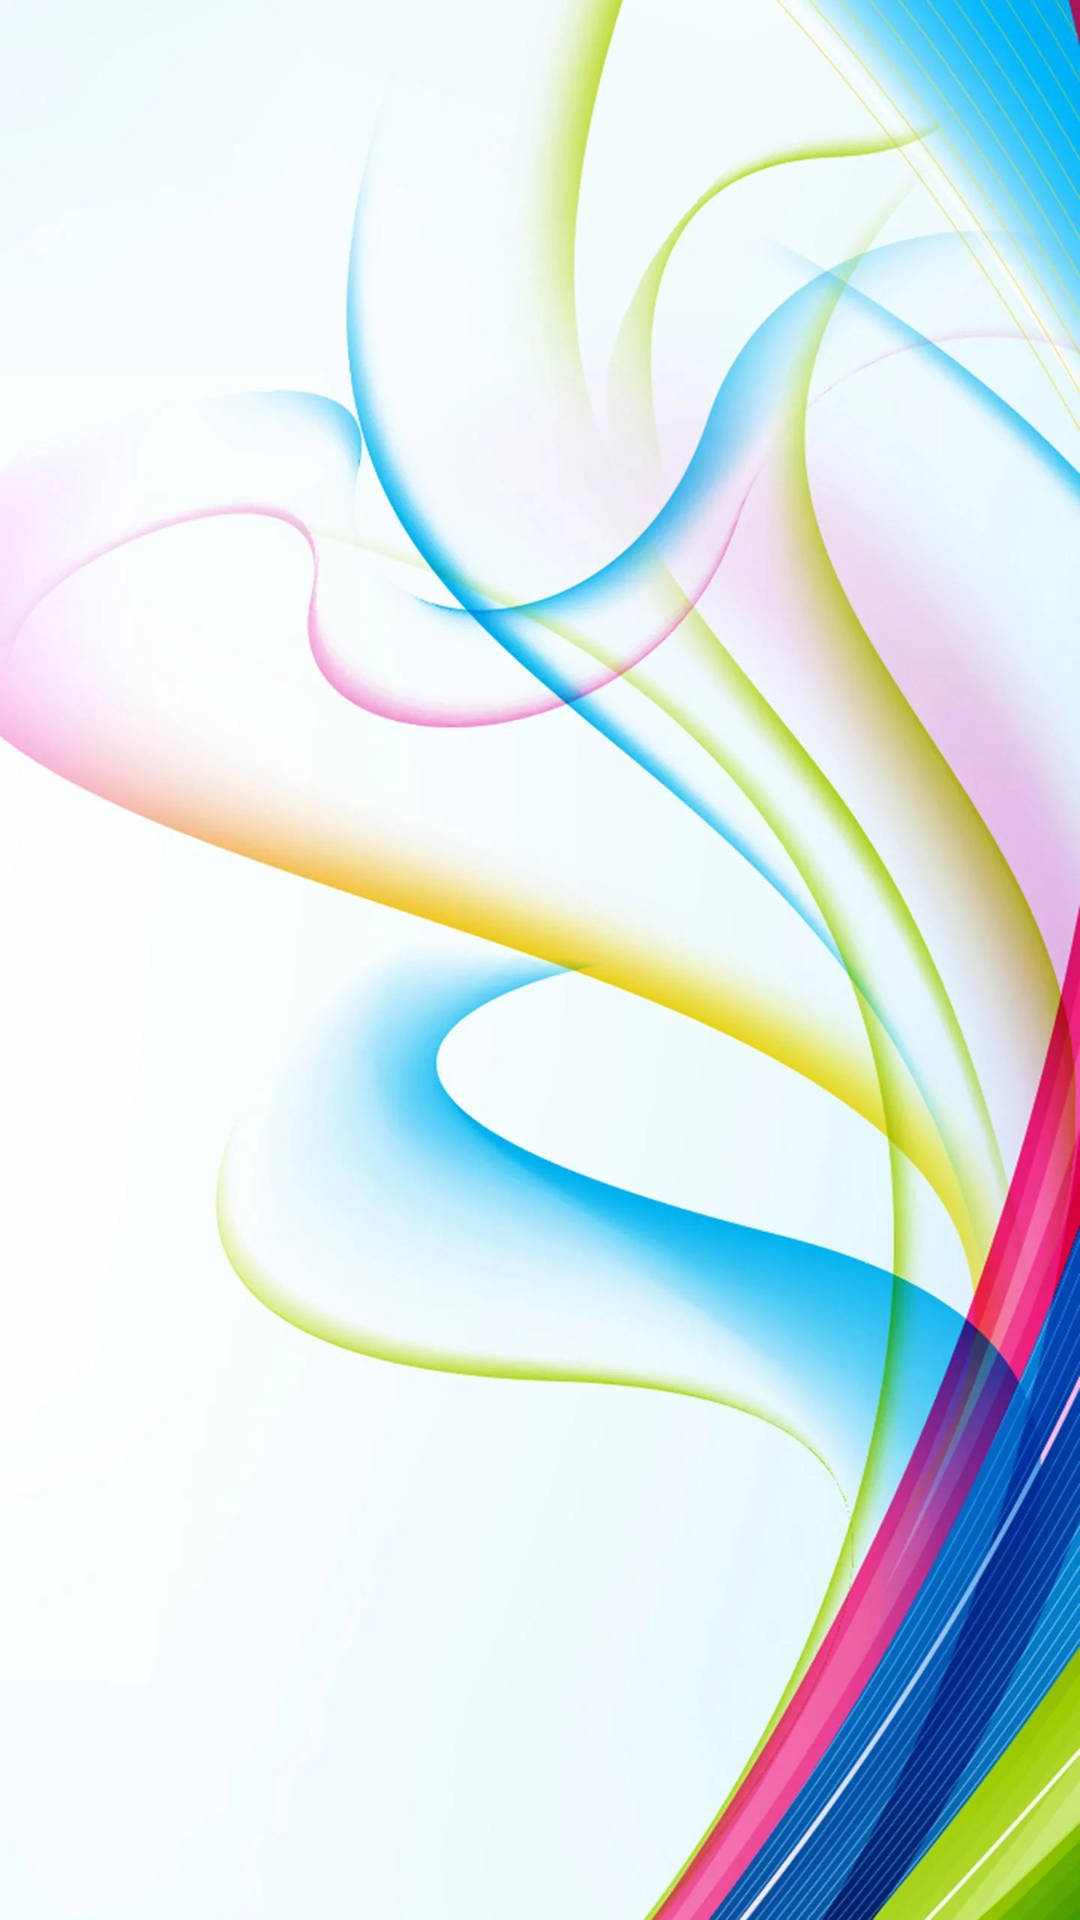 Panasonic Colorful Abstract Background